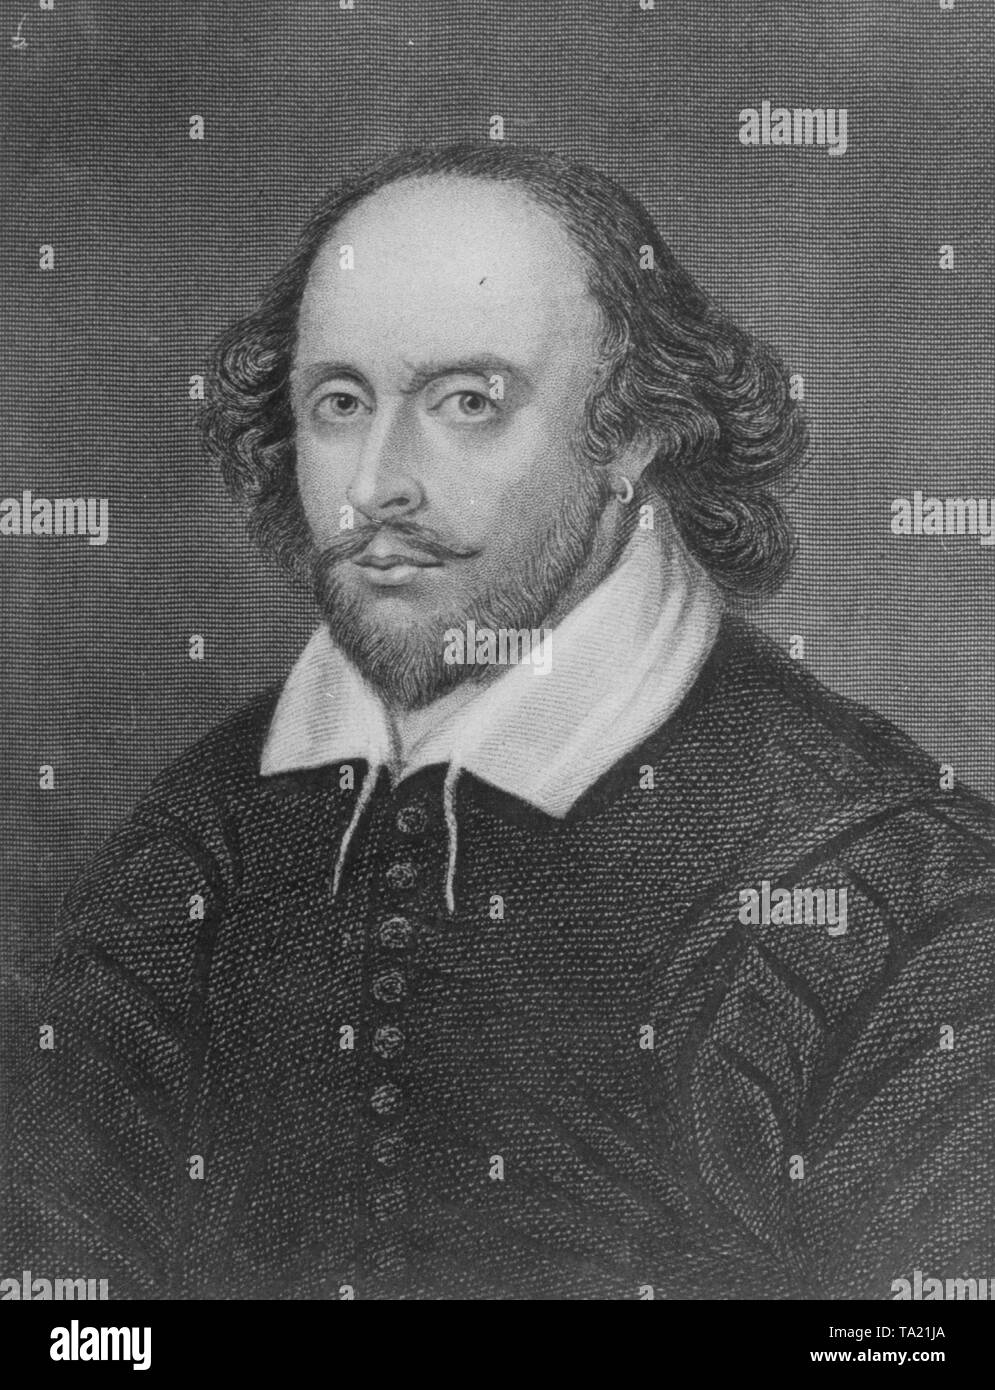 William Shakespeare is an English playwright, actor and poet, who was born in Stratford-upon-Avon on 23.4. (baptized on 25.4.) 1564, he died on 23.4.1616. His background and his life are largely unknown. Previously assumed details regarding his life (father a member of the glove makers guild in Stratford, marriage in 1582) were not yet confirmed by recent research. Starting 1589 he stayed in London, from 1594 he belonged to the theater group the Chamberlain's Men (since 1603 King's Men), where he remained during his entire theatrical career. In 1599 he became partner in the Globe Theatre, in Stock Photo